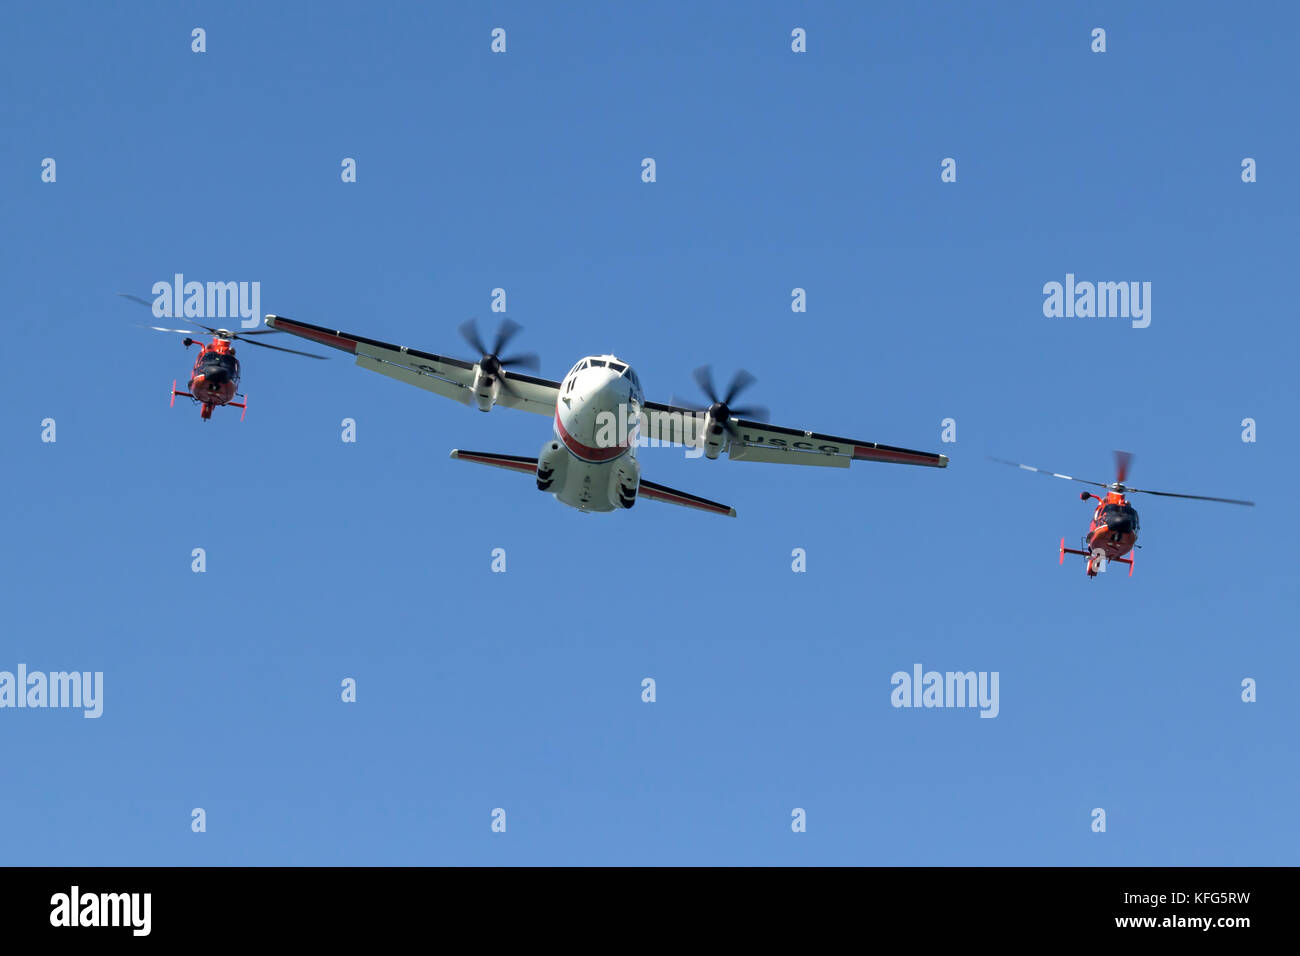 A pair of Coast Guard MH-65 Dolphin helicopters from Air Station San Francisco fly in close formation with a C-27J Spartan from Air Station Sacramento Stock Photo